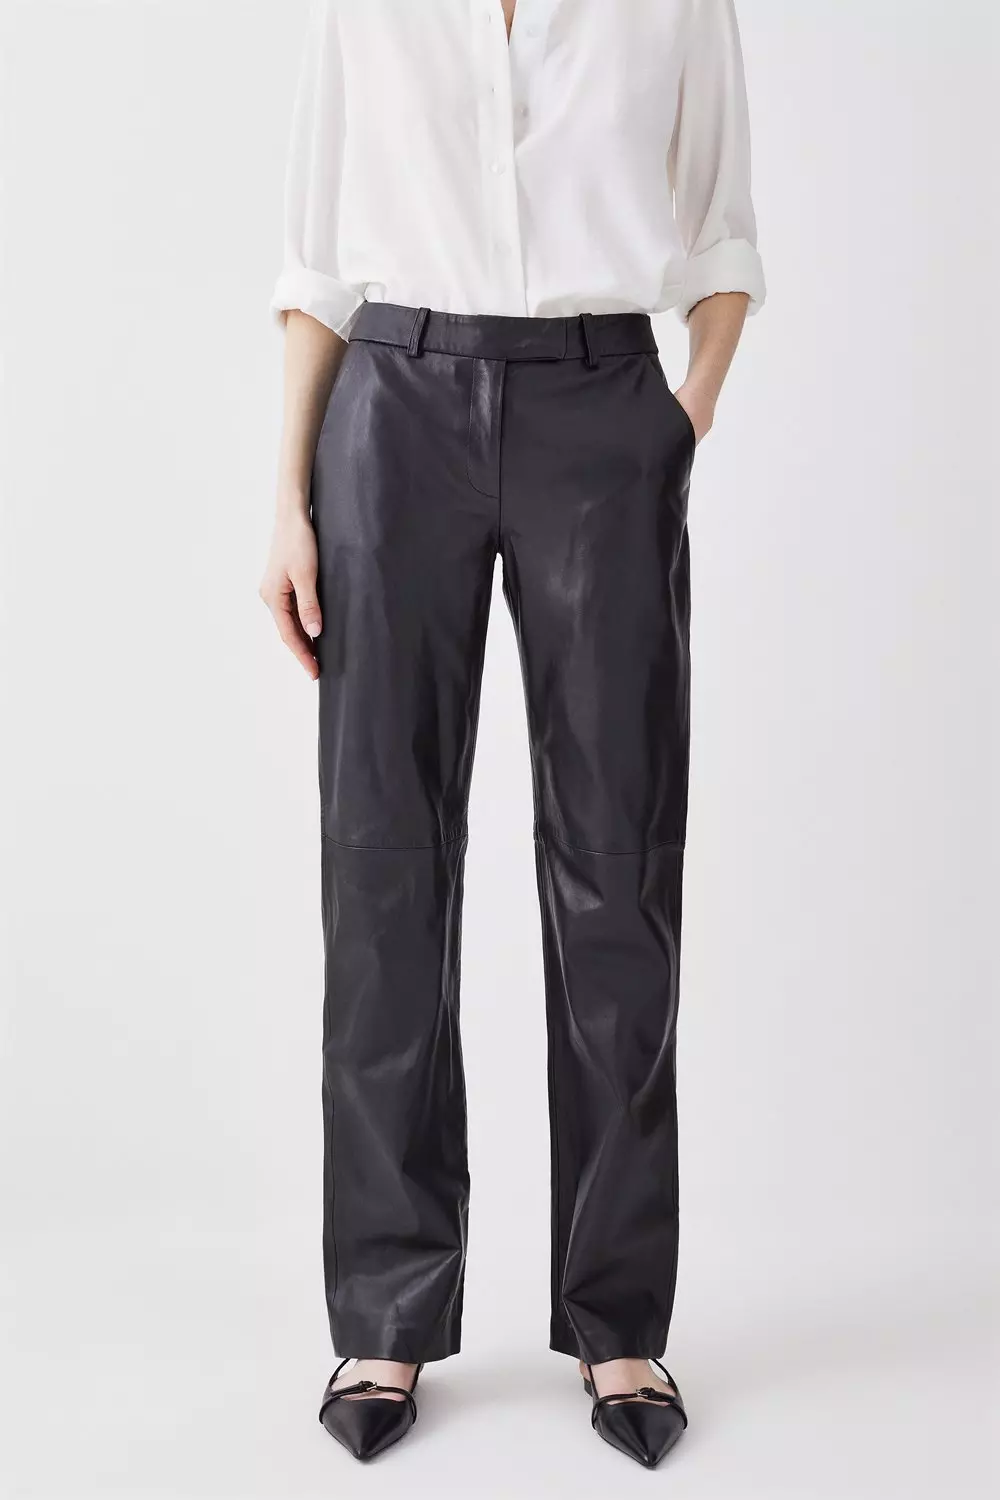 Stretch Leather Low Rise Trouser Black, Pants